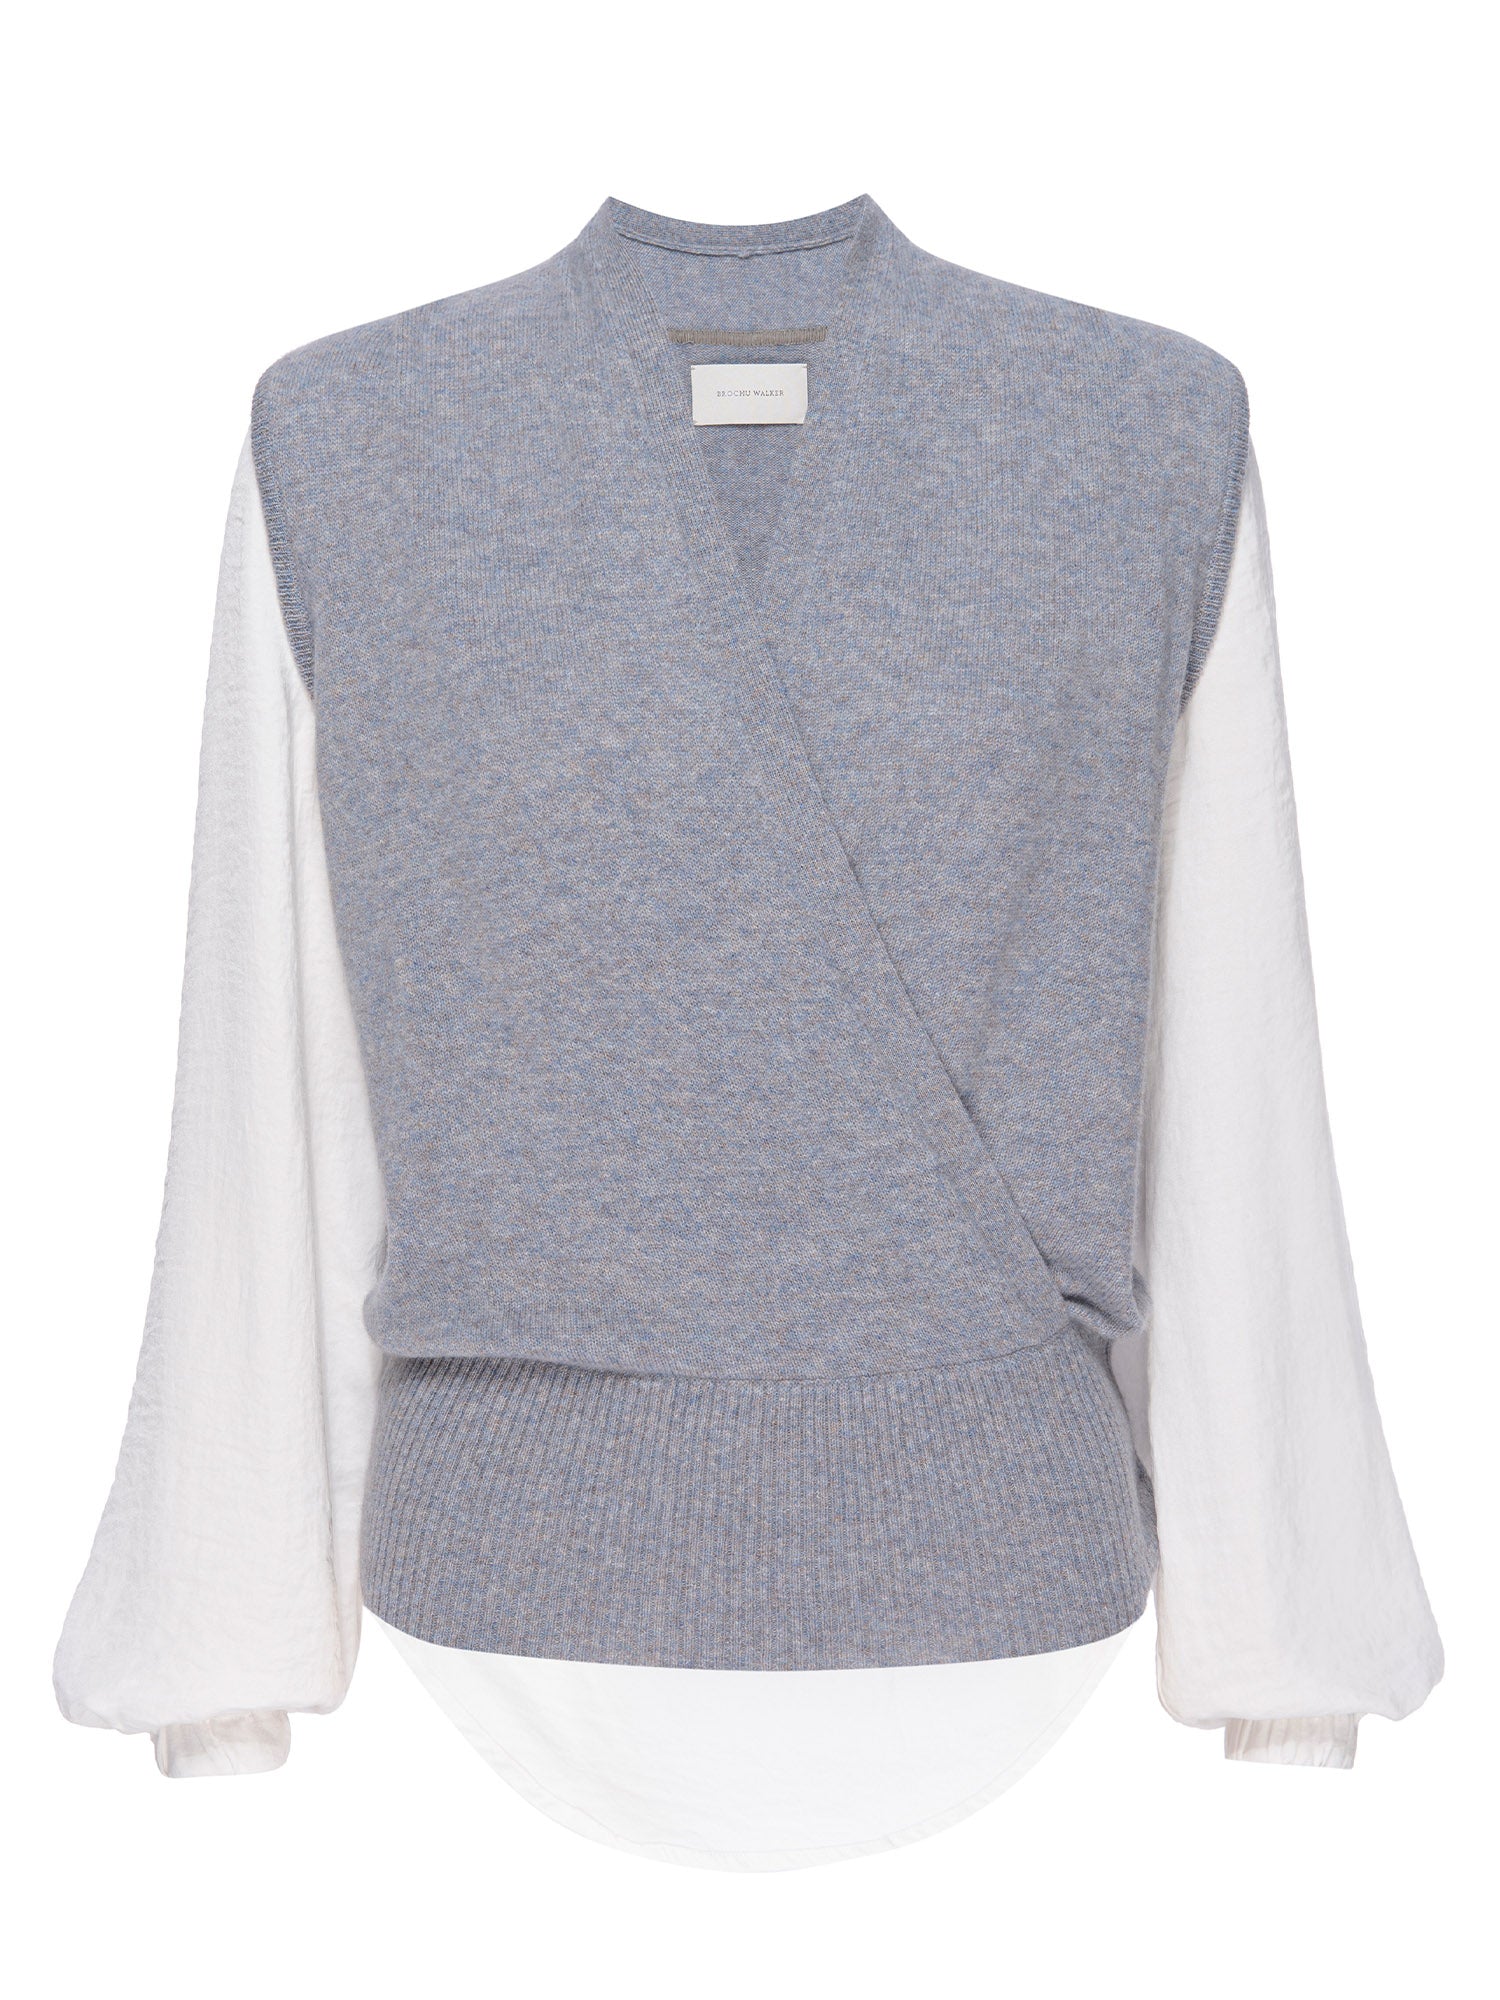 Phinneas blue white layered woven and knit sweater flat view